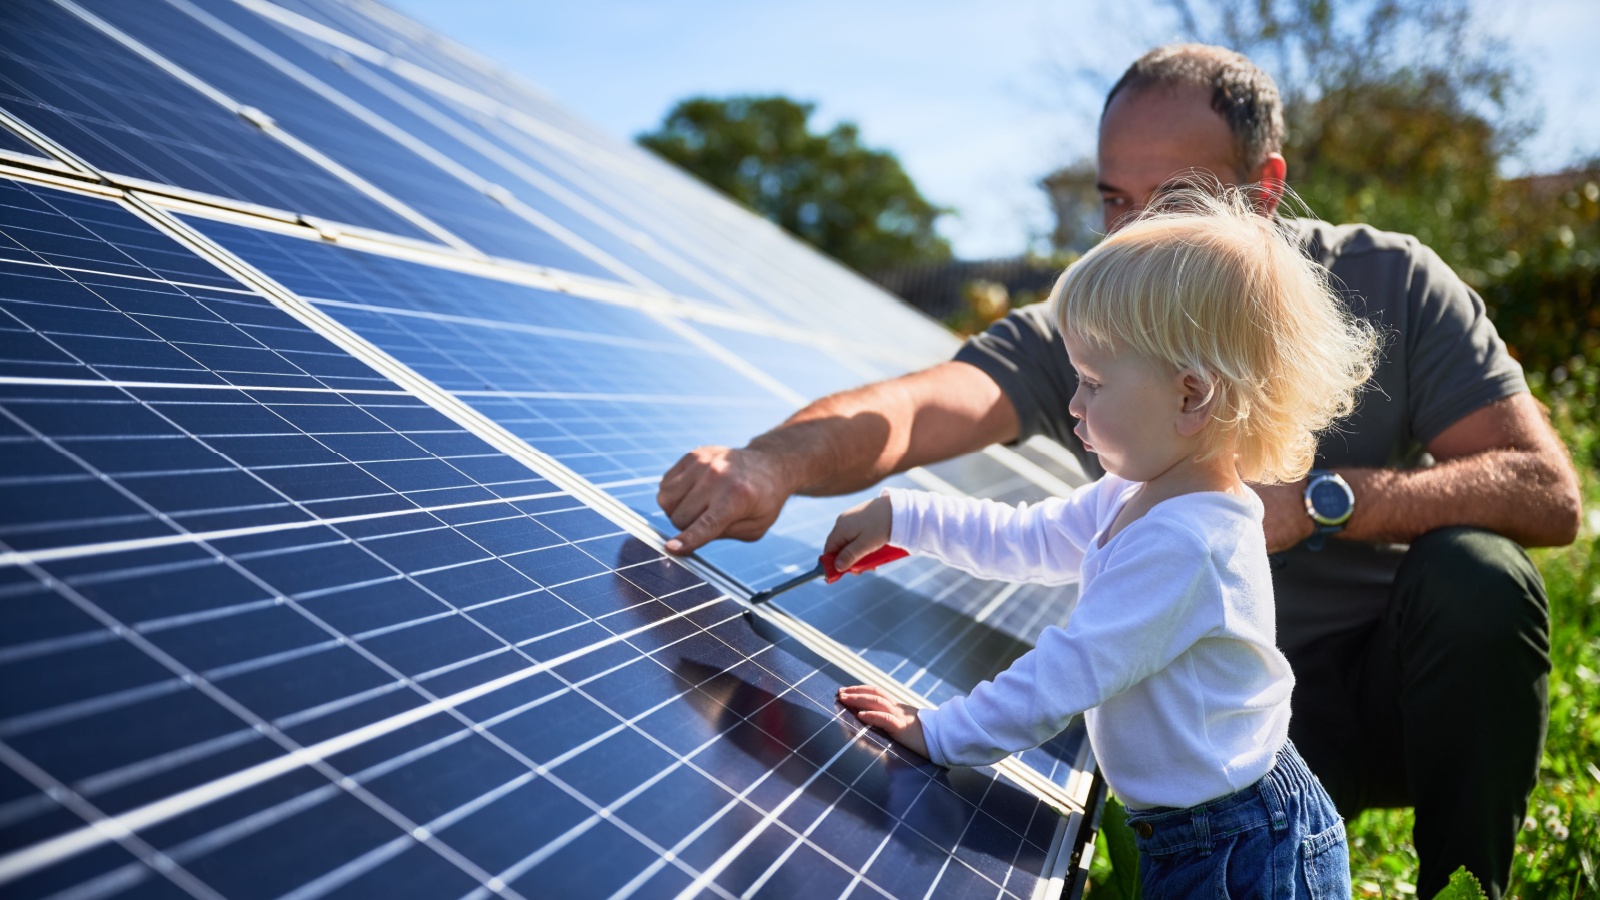 Man showing his small child the solar panels during sunny day. Father presenting to daughter modern energy resource. Little steps to alternative energy.